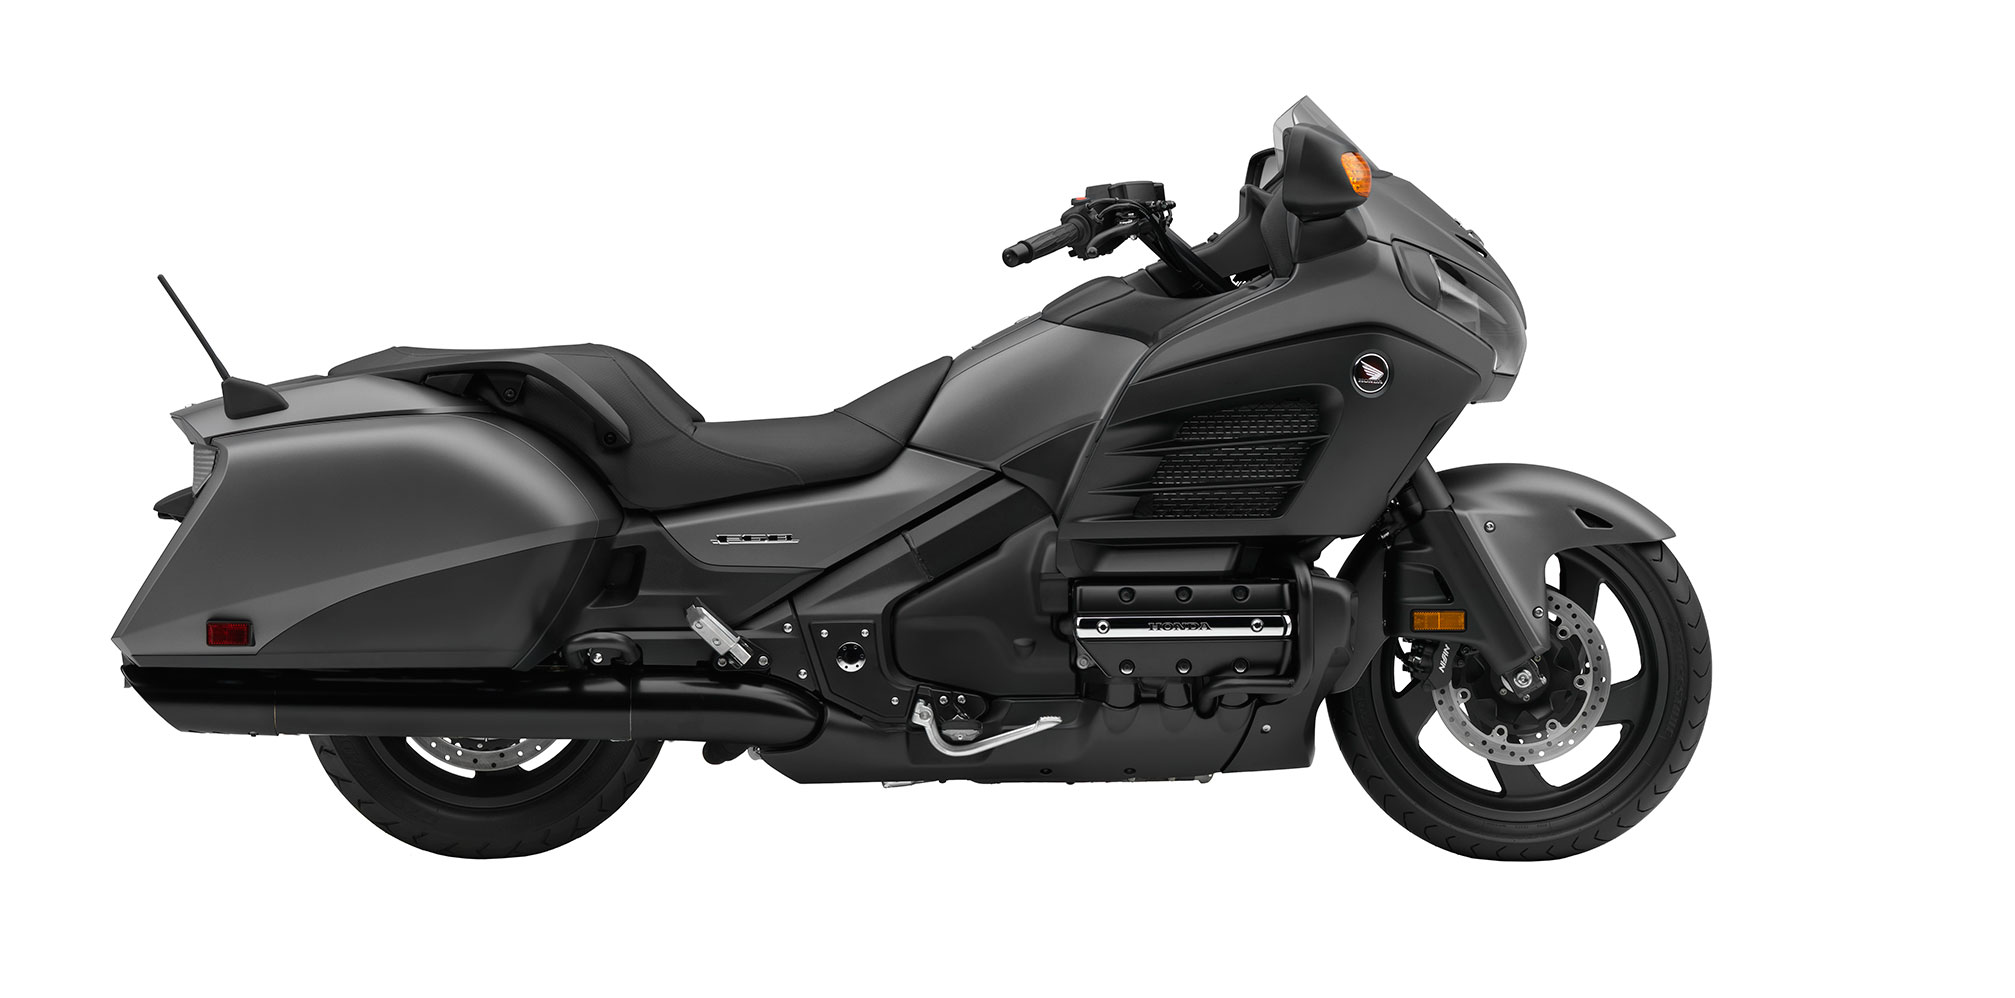 2015 Honda Gold Wing F6B Deluxe Review